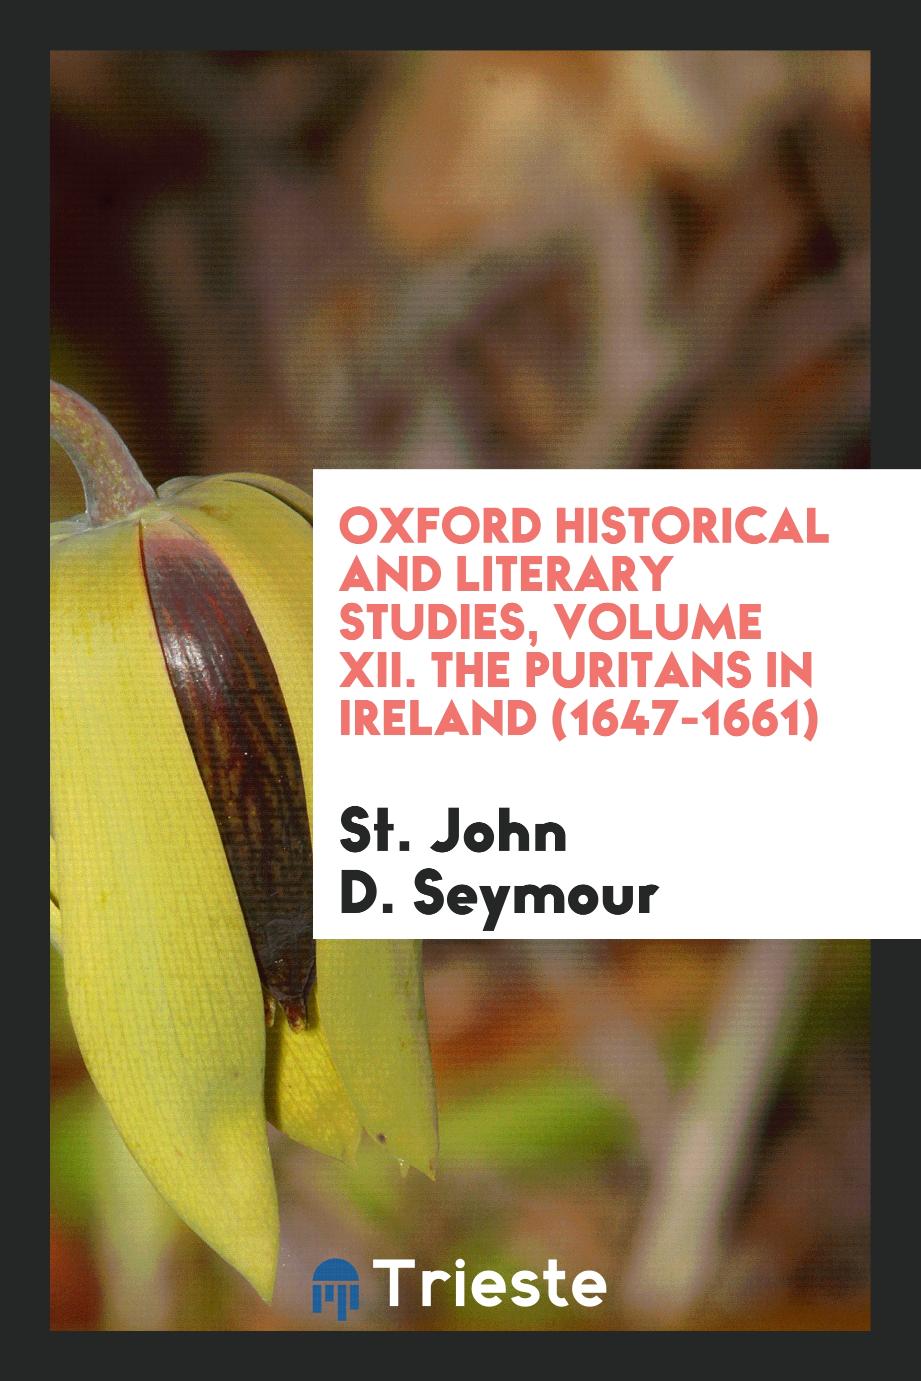 Oxford Historical and Literary Studies, Volume XII. The Puritans in Ireland (1647-1661)